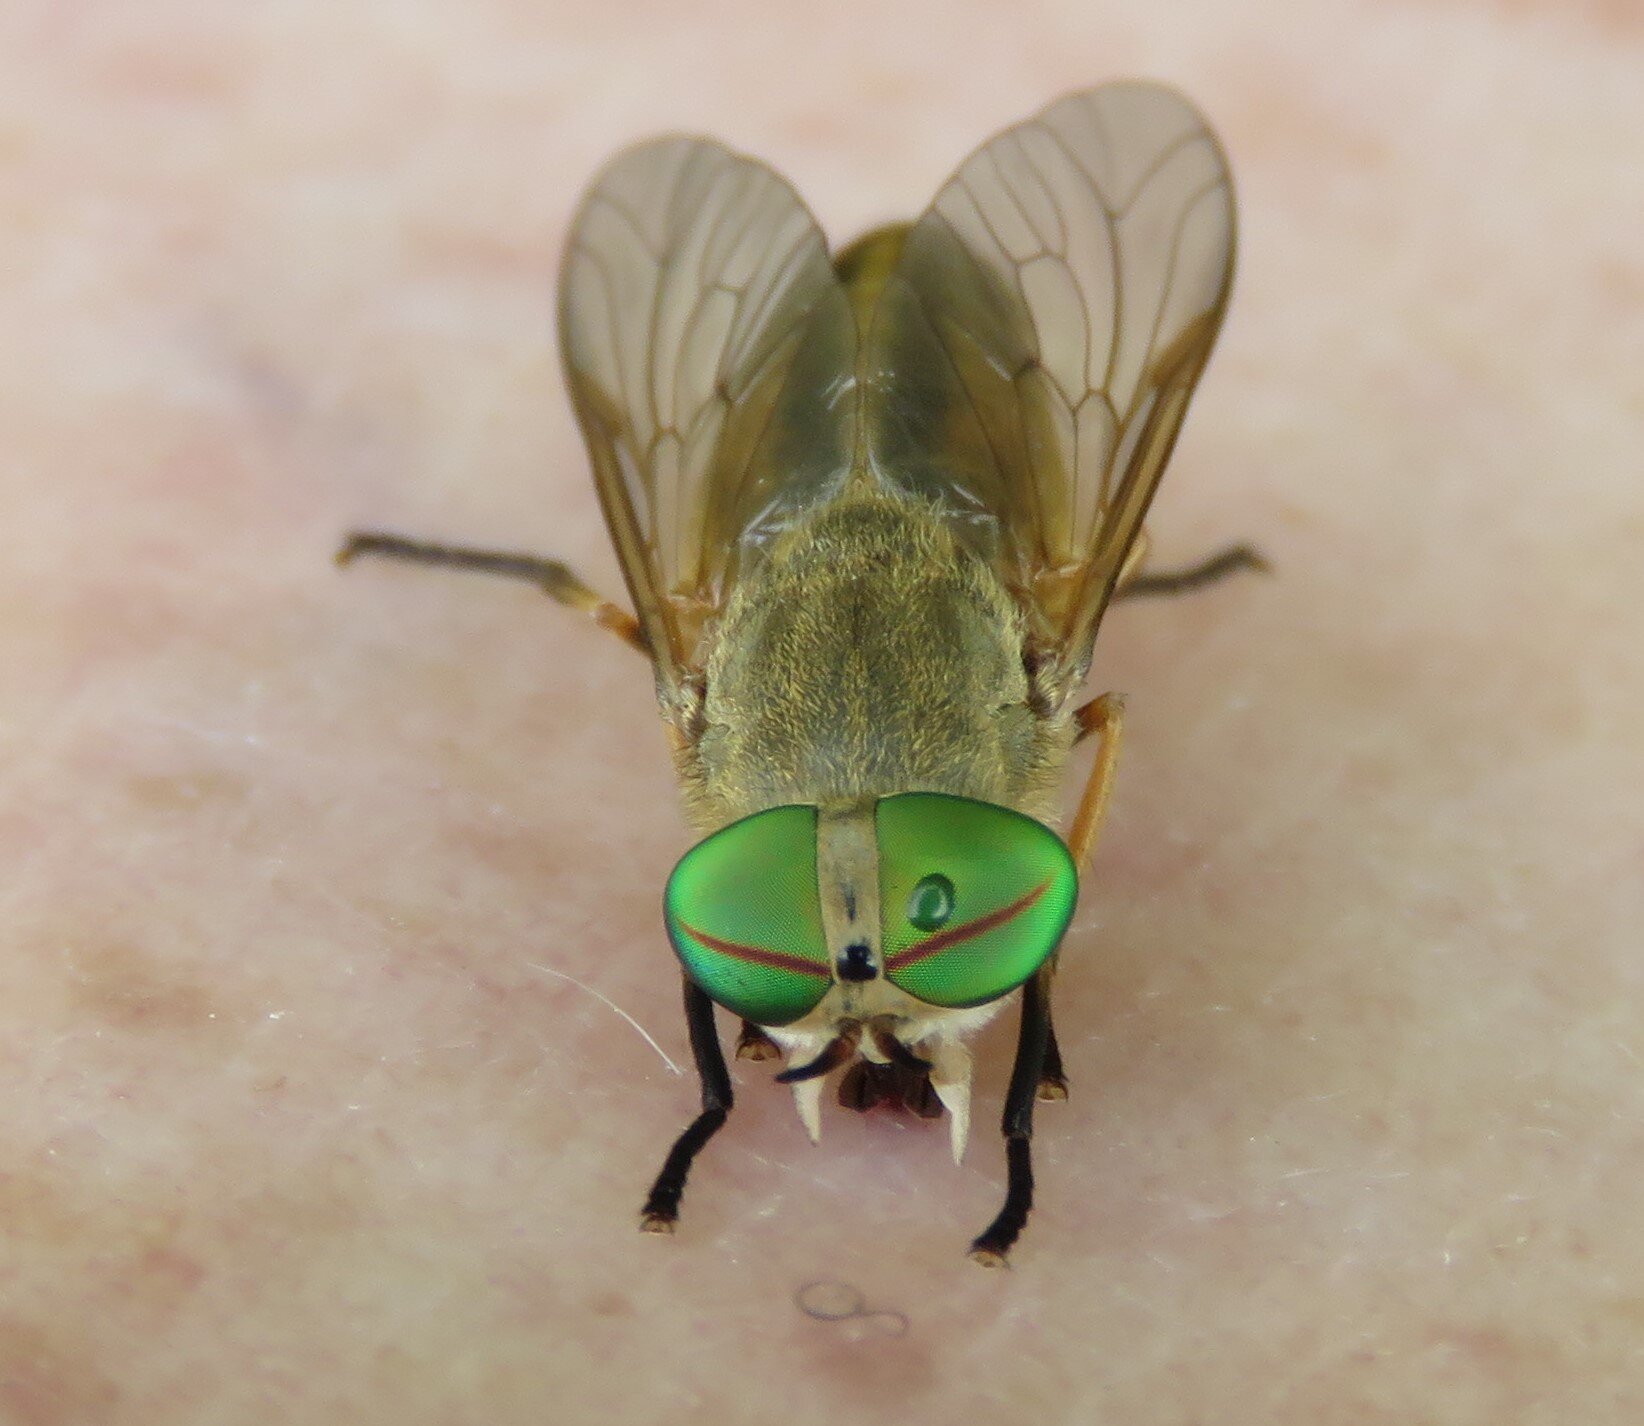 The Greenhead Fly